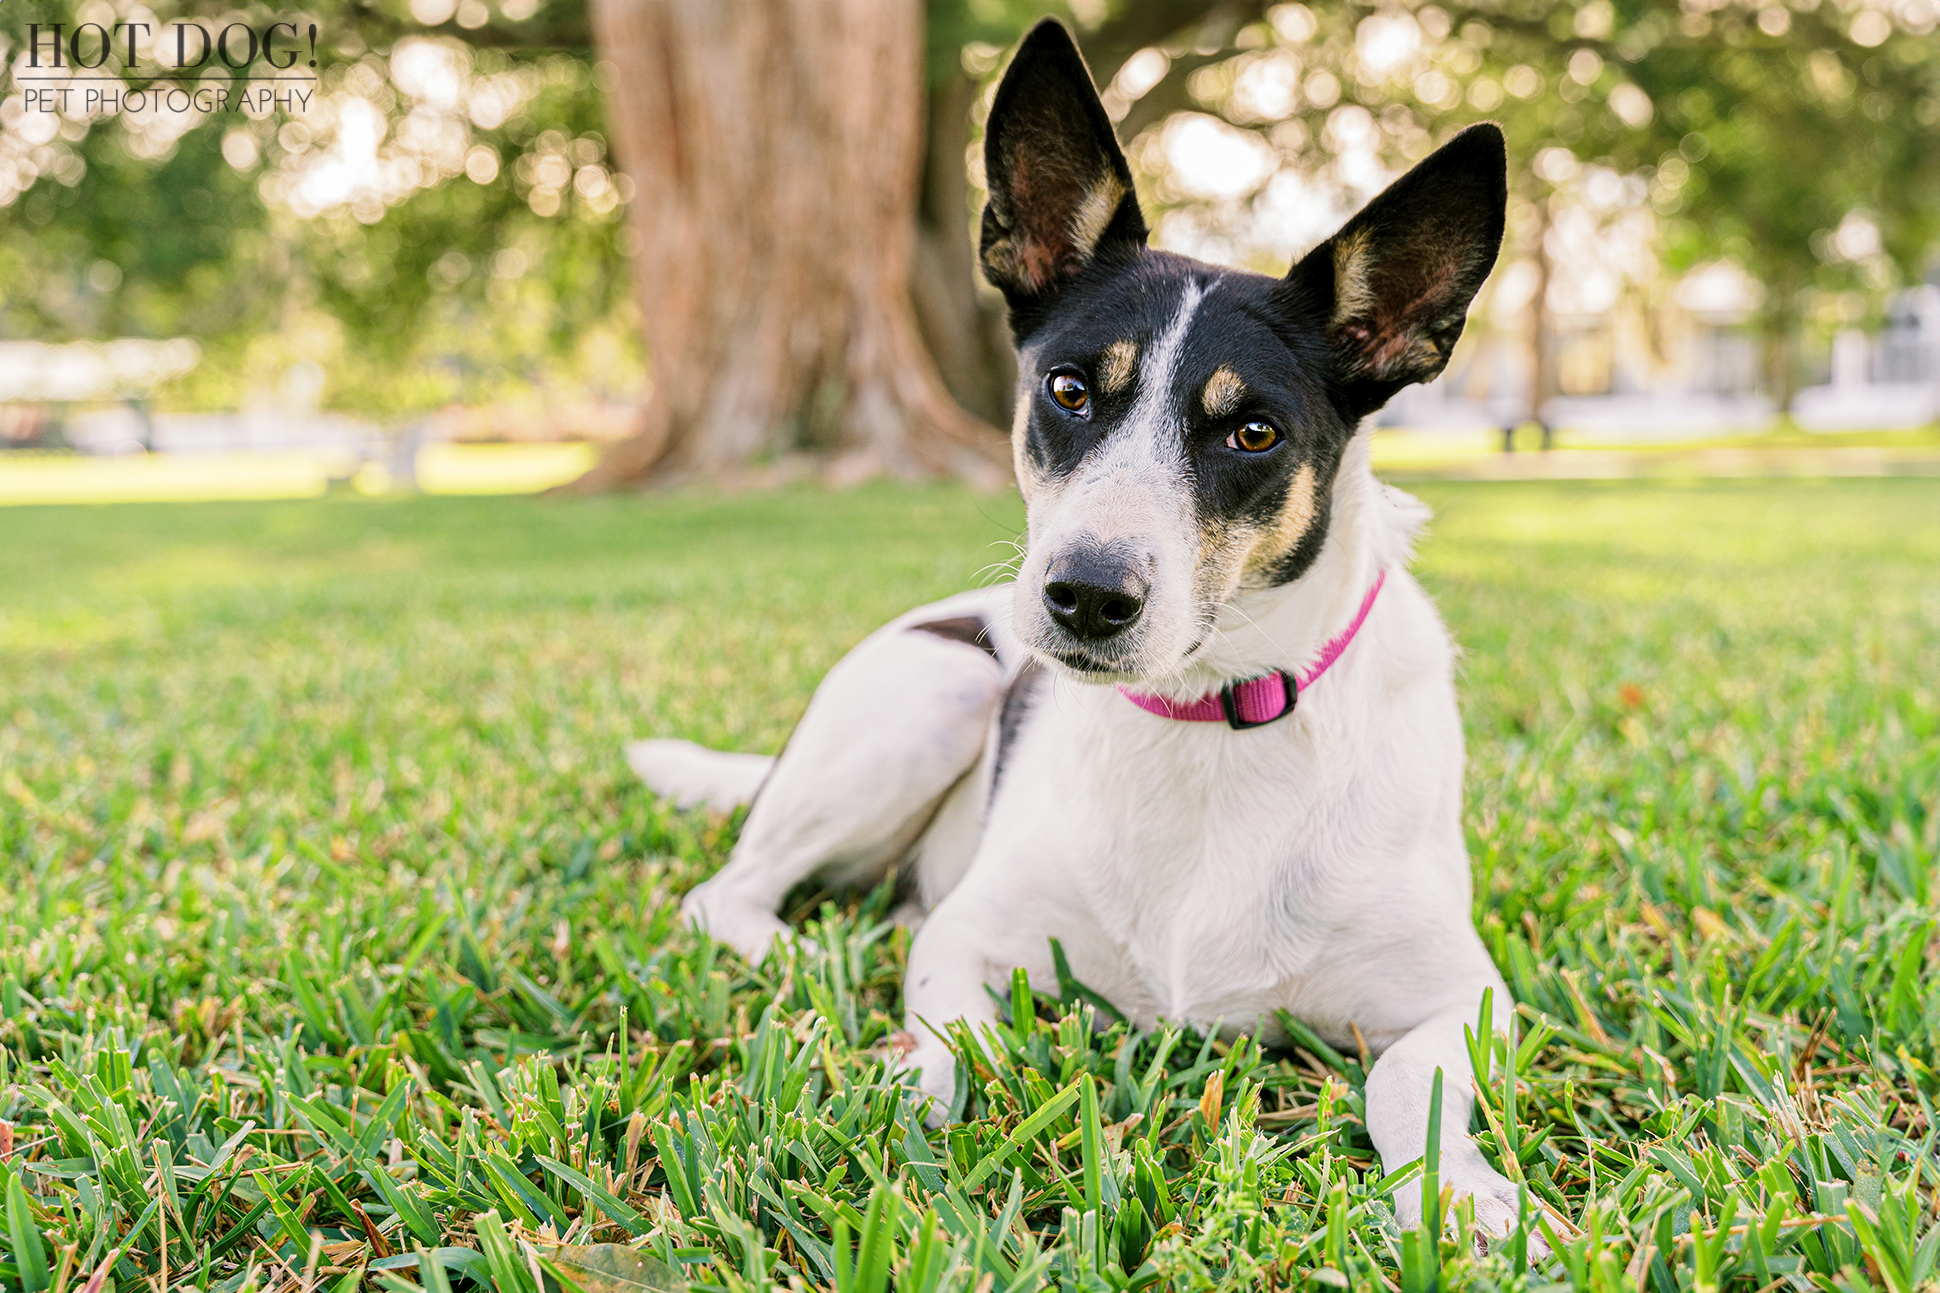 Orlando Dog Photography with a Heart: Choose Hot Dog! Pet Photography to celebrate rescue pet adoption stories like Miracle, the joyful rat terrier mix.